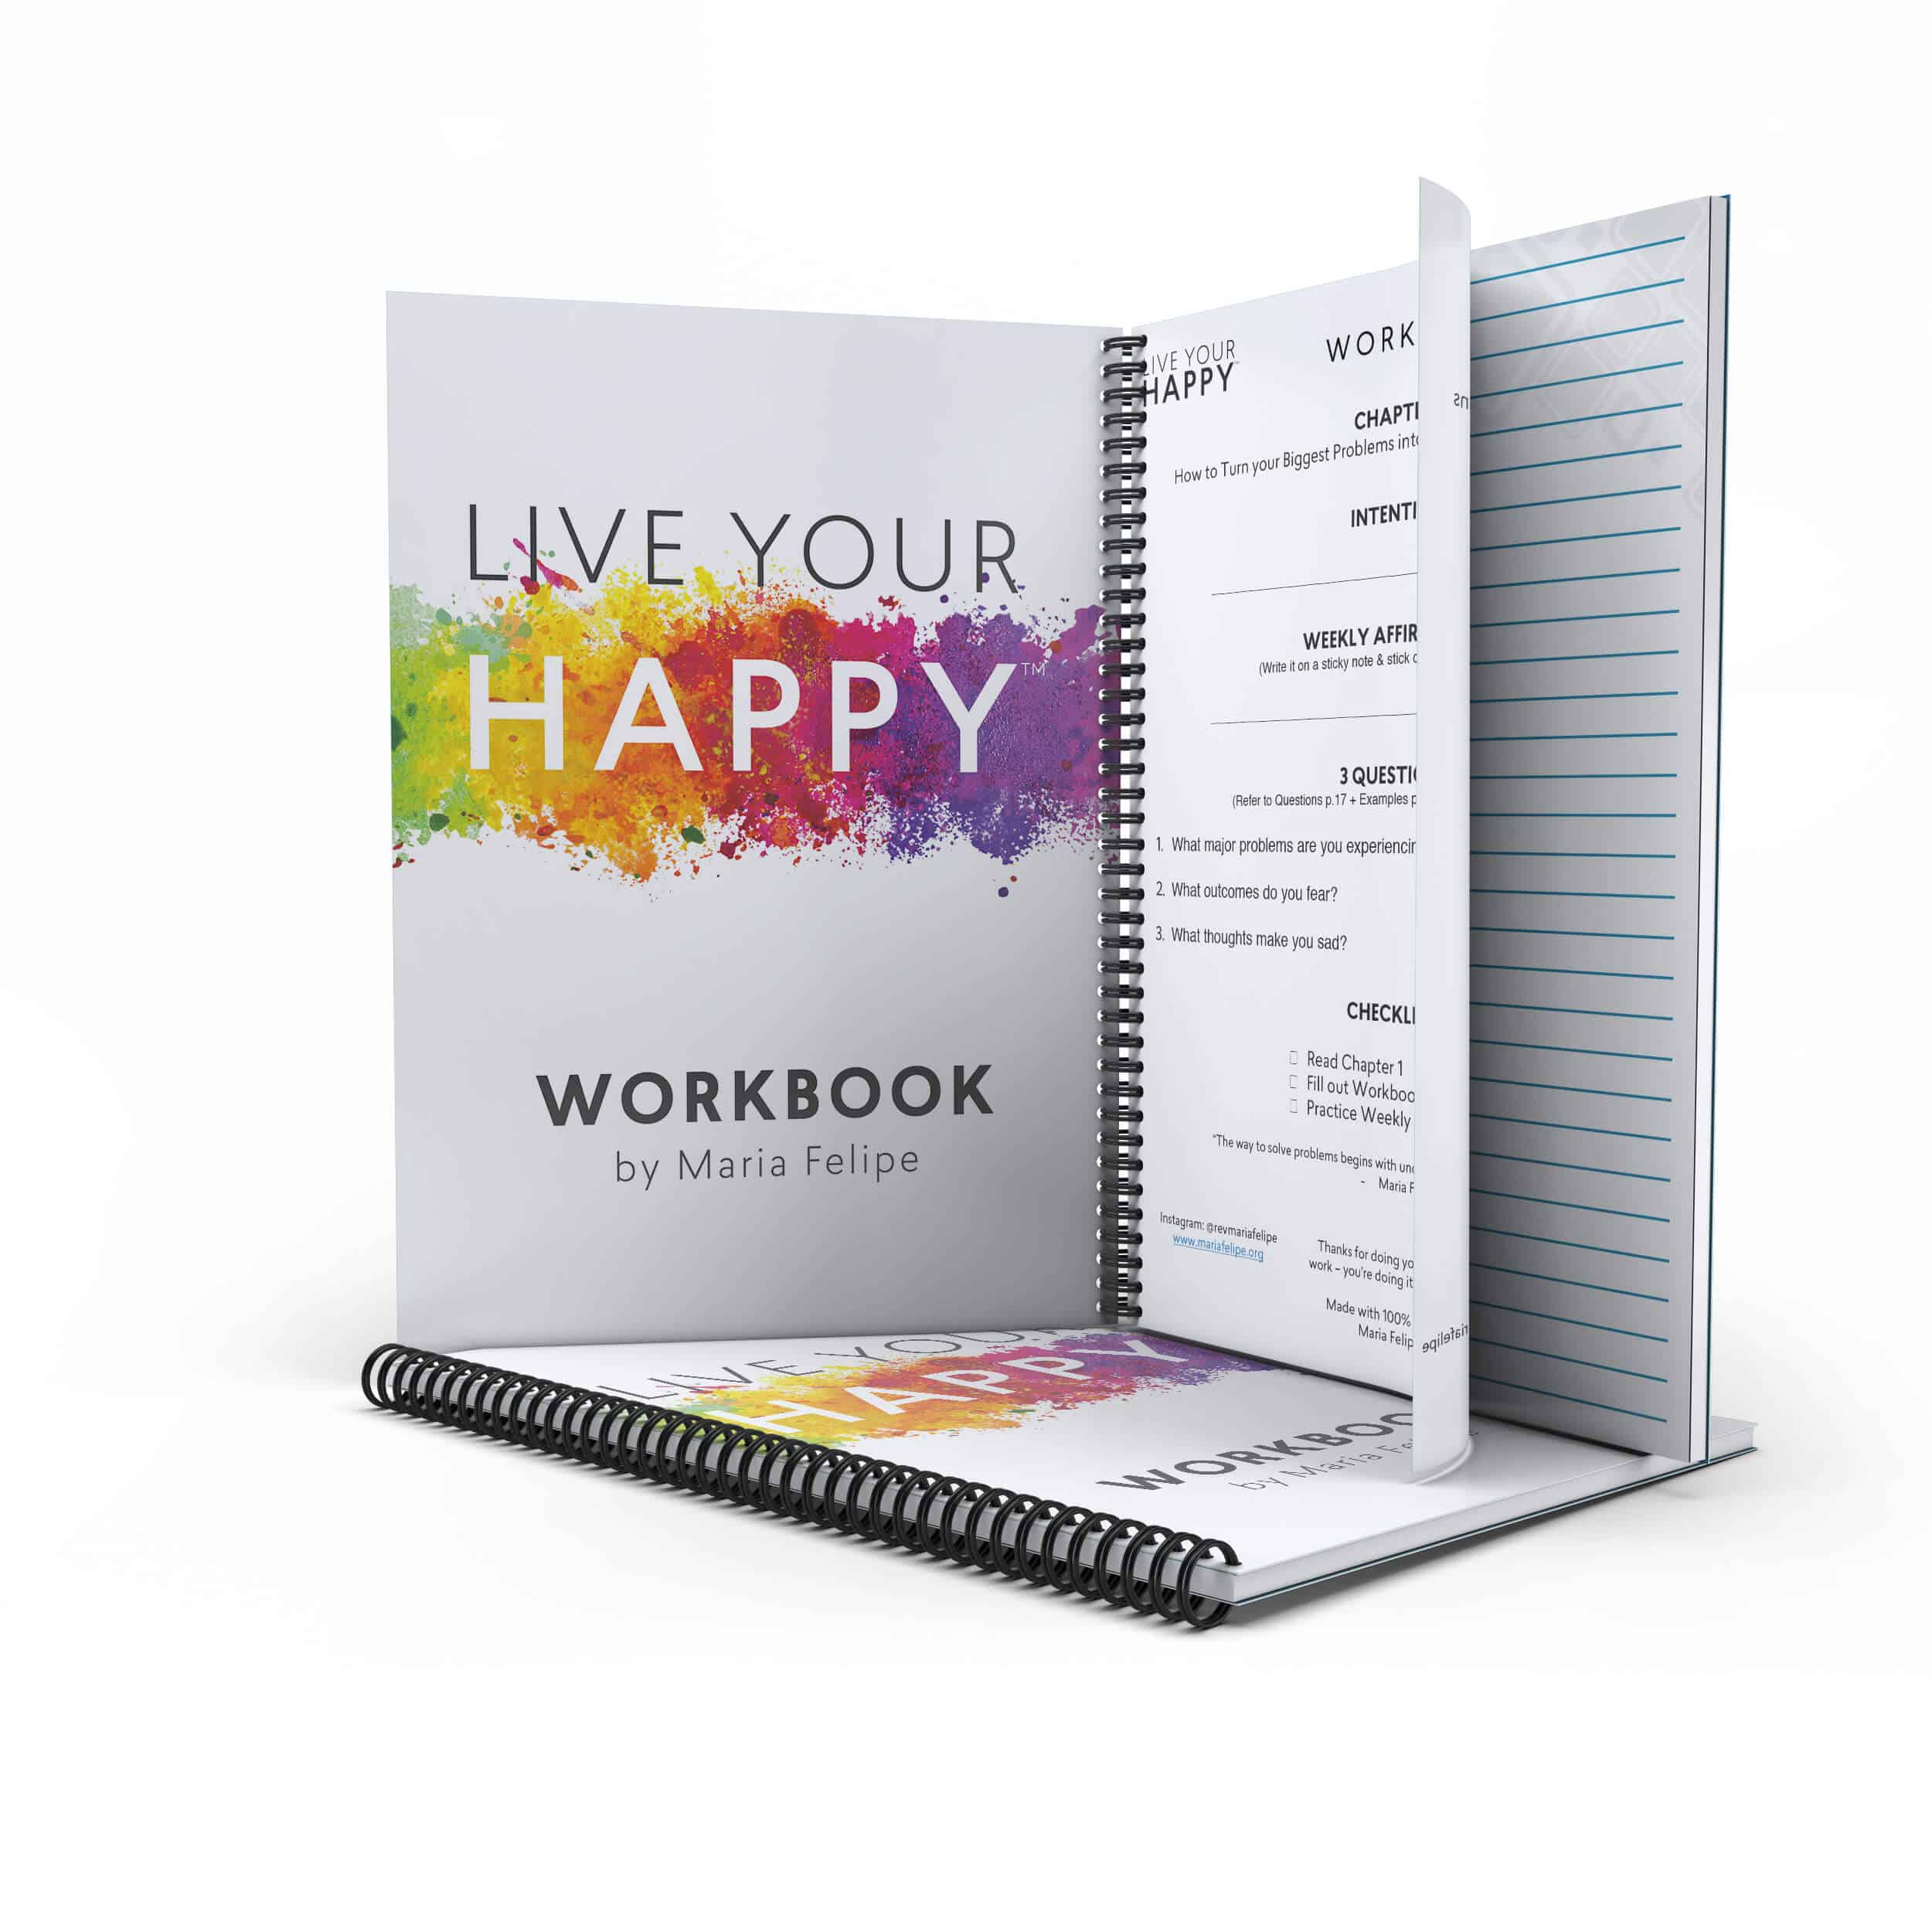 Download Live Your Happy Workbook Free Meditation Maria Felipe Live Your Happy